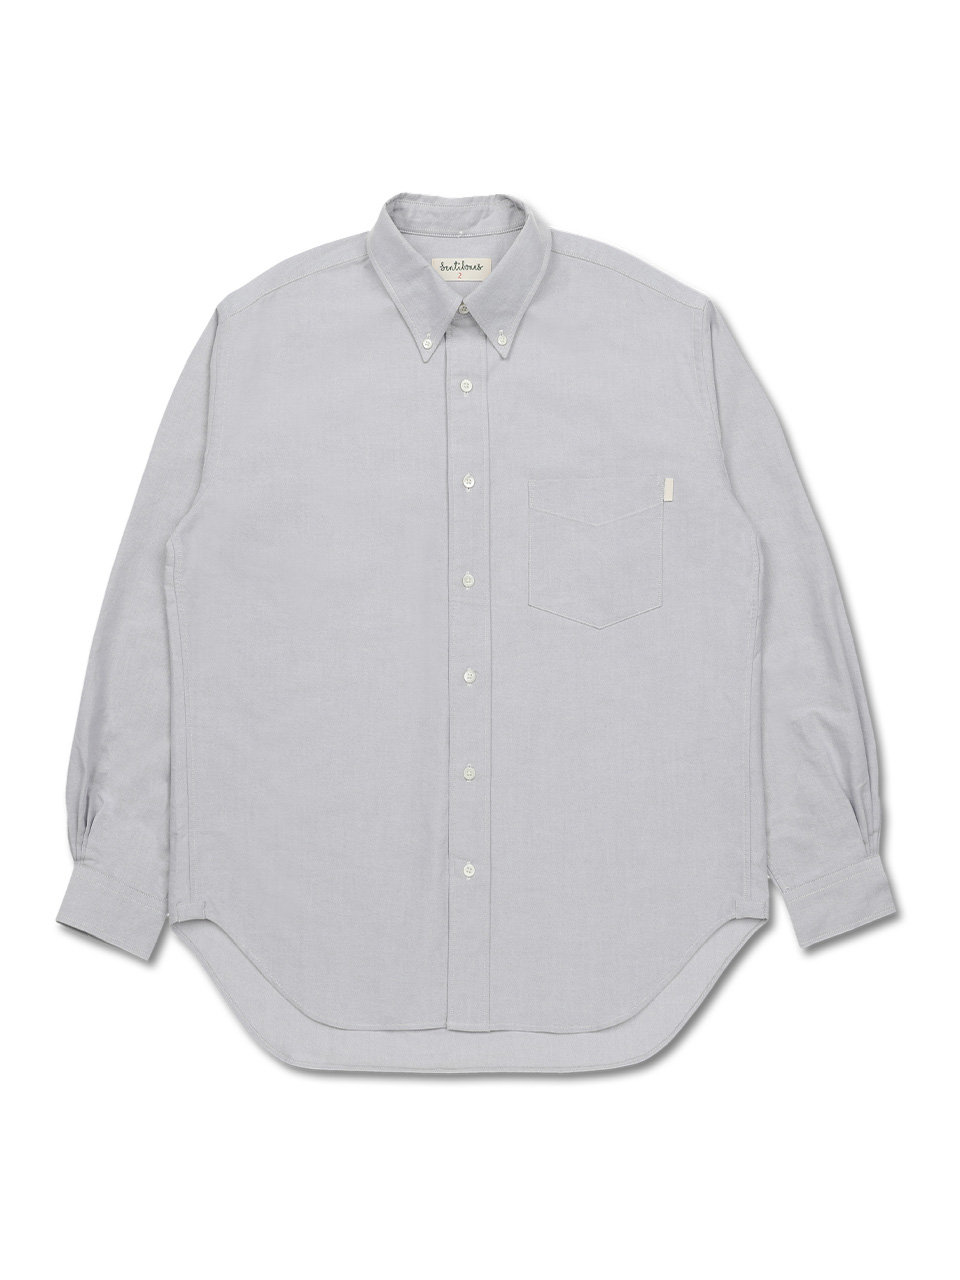 EASYGOING OXFORD SHIRTS - GREY